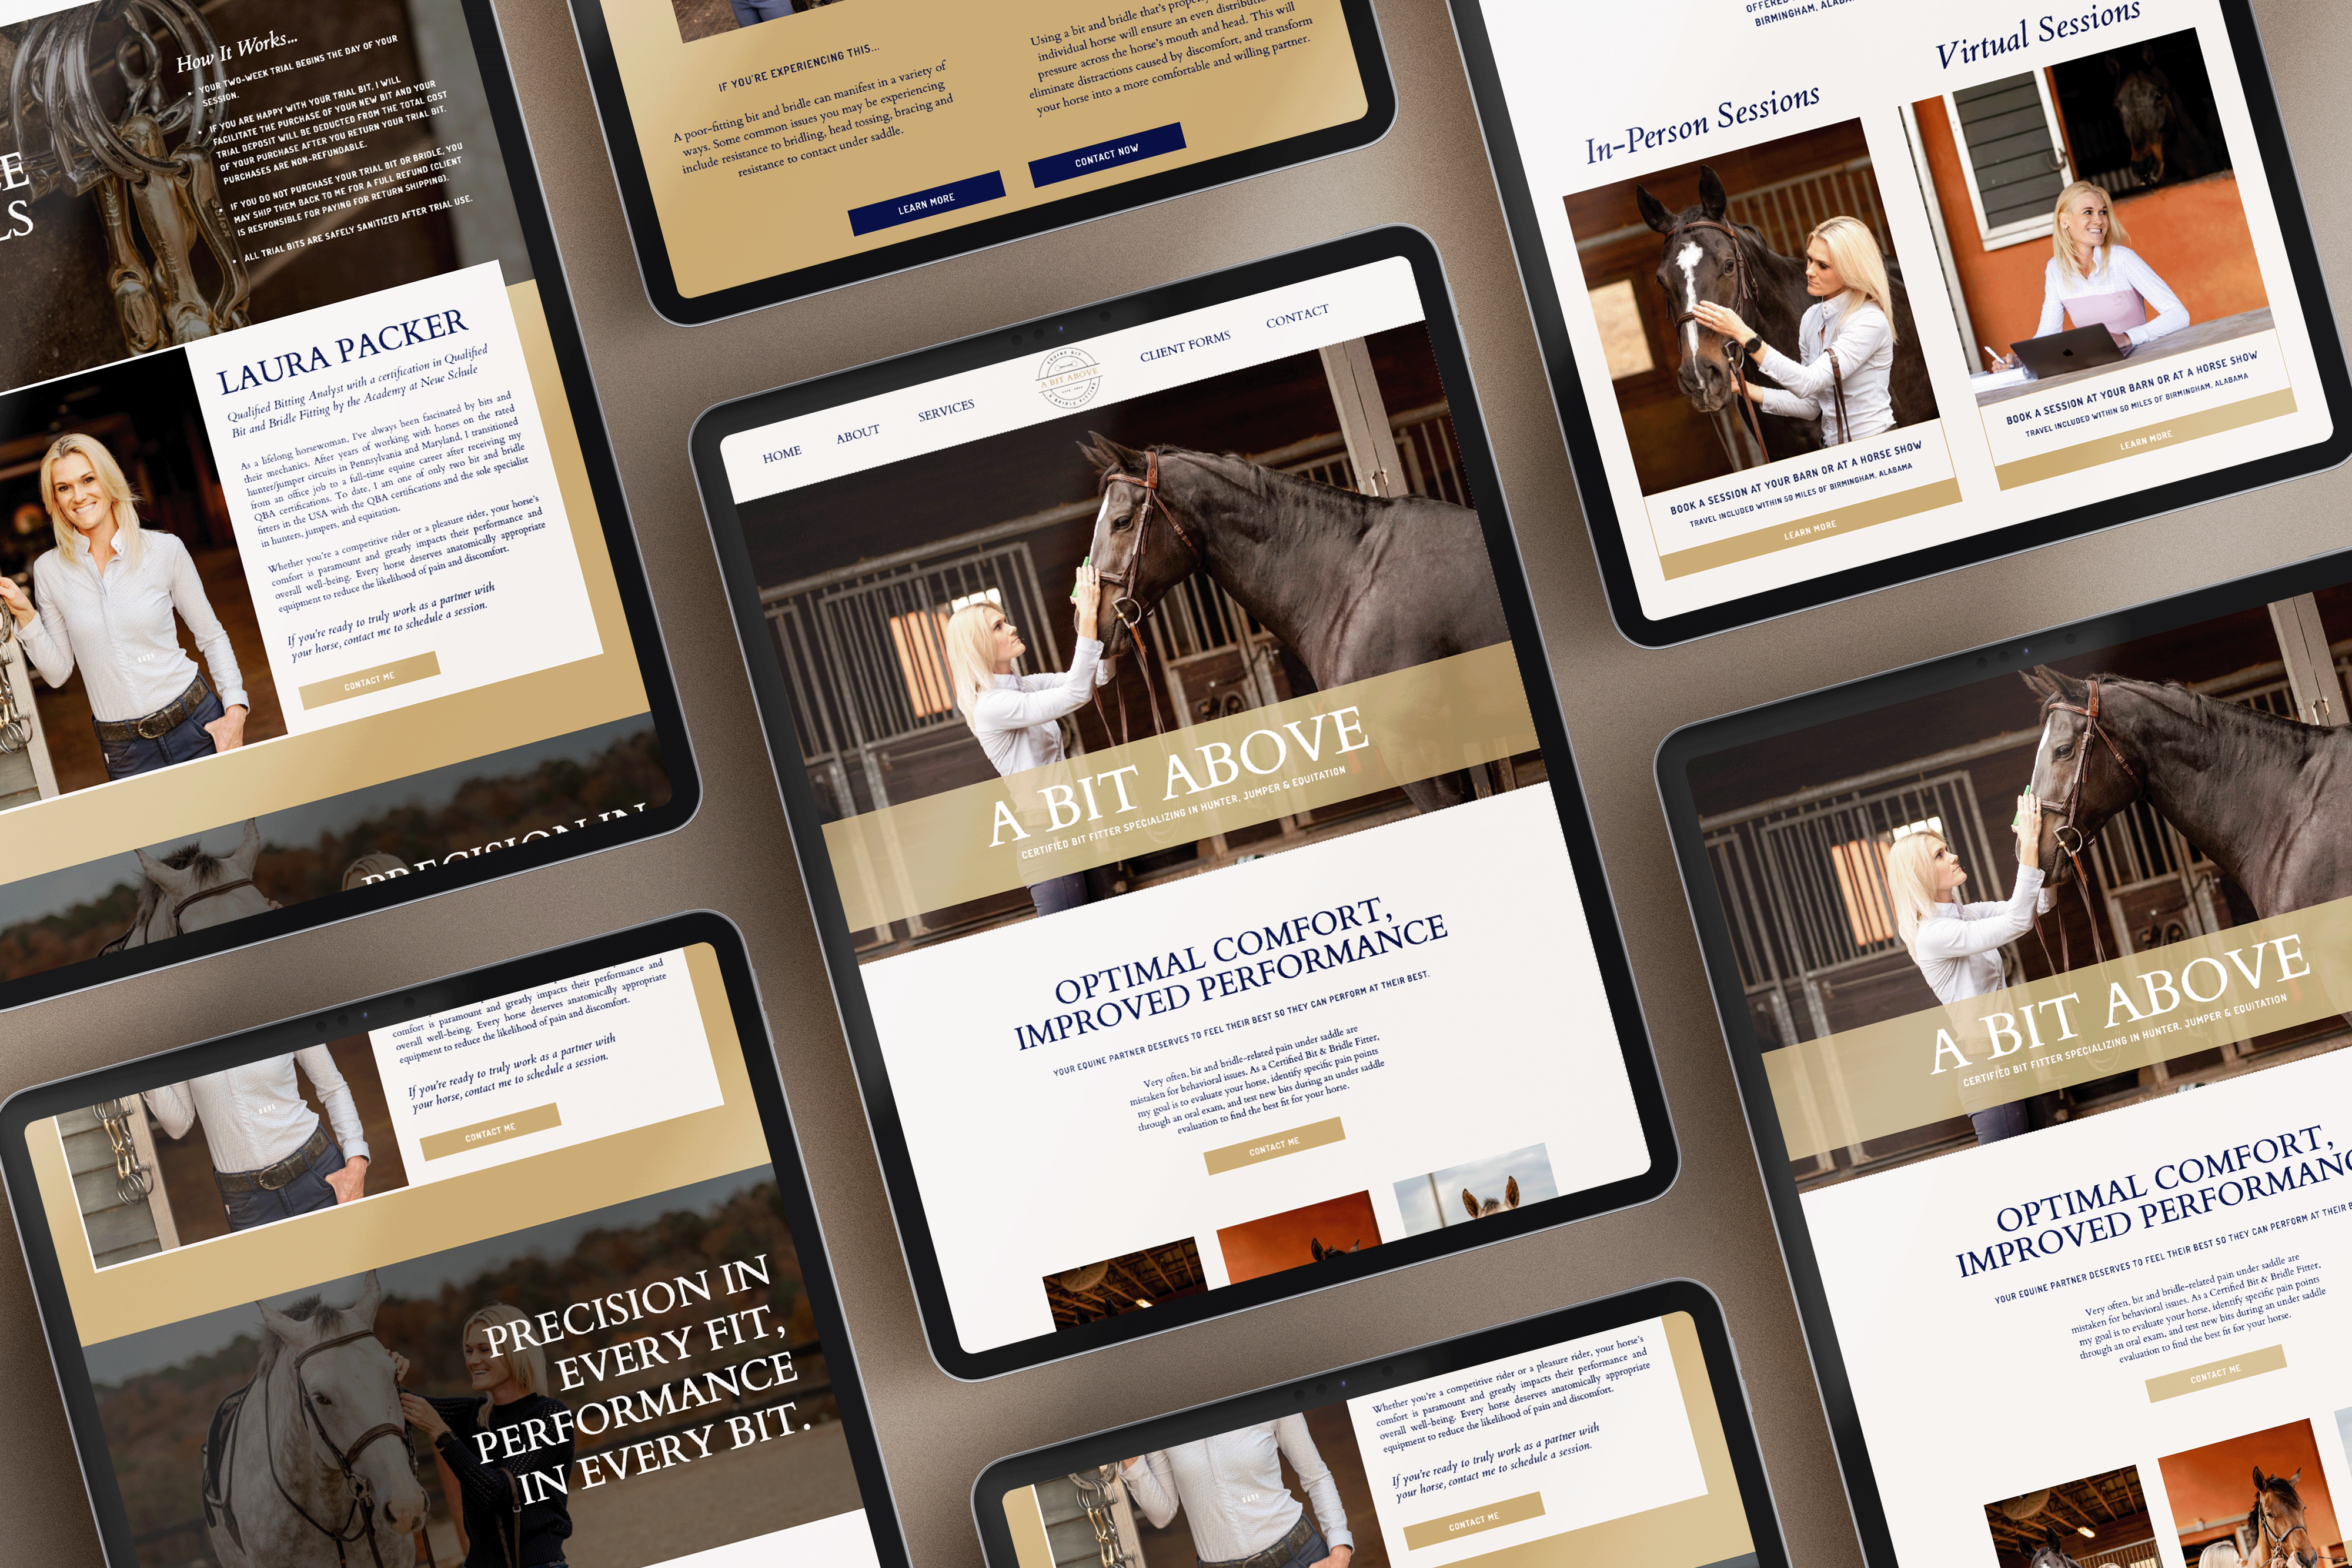 Mockups of the website design for A Bit Above Equine in iPad format